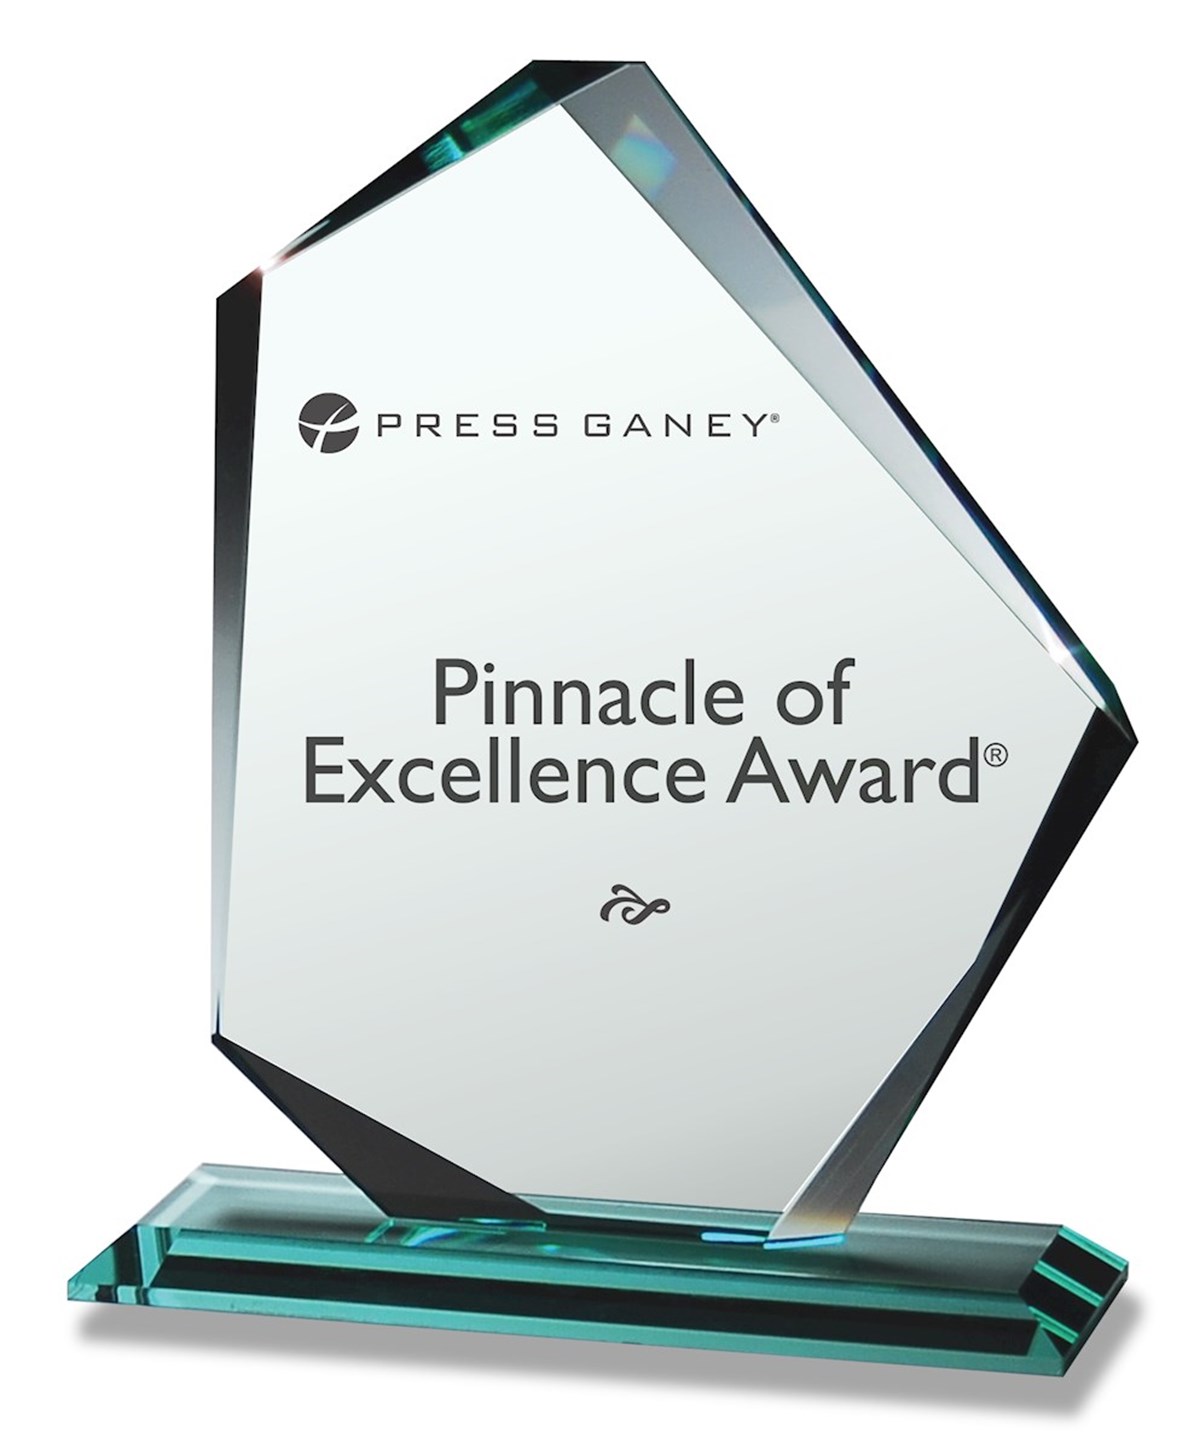 SCH Receives 2018 Press Ganey Pinnacle of Excellence Award